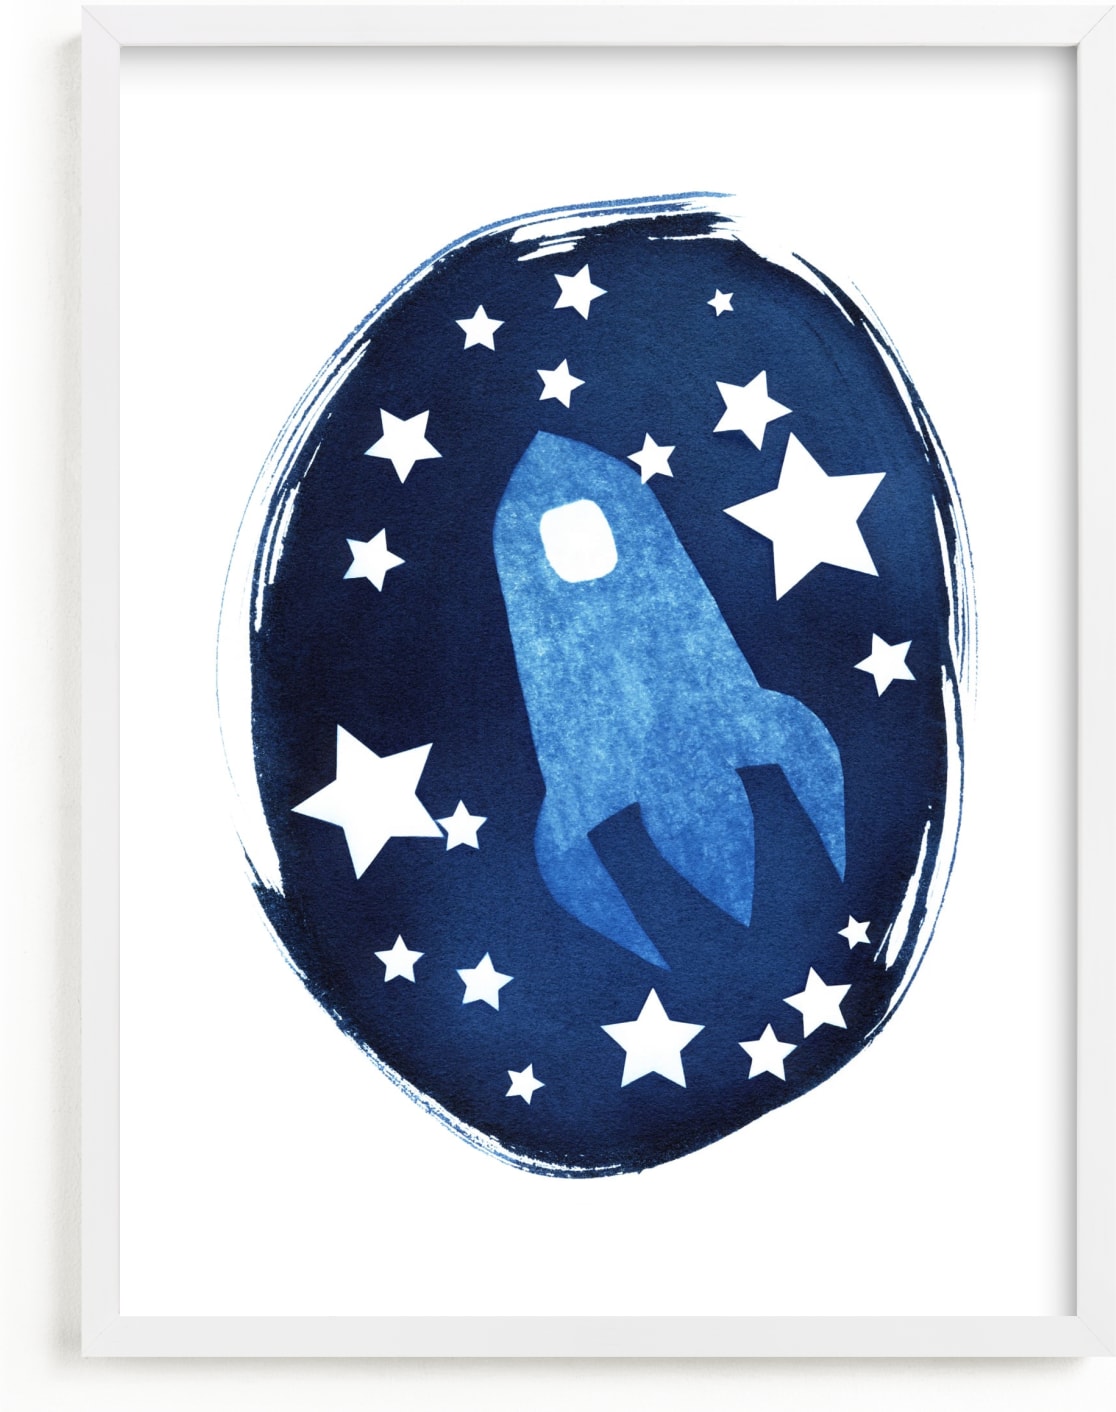 This is a blue kids wall art by raven erebus called To the stars and beyond.